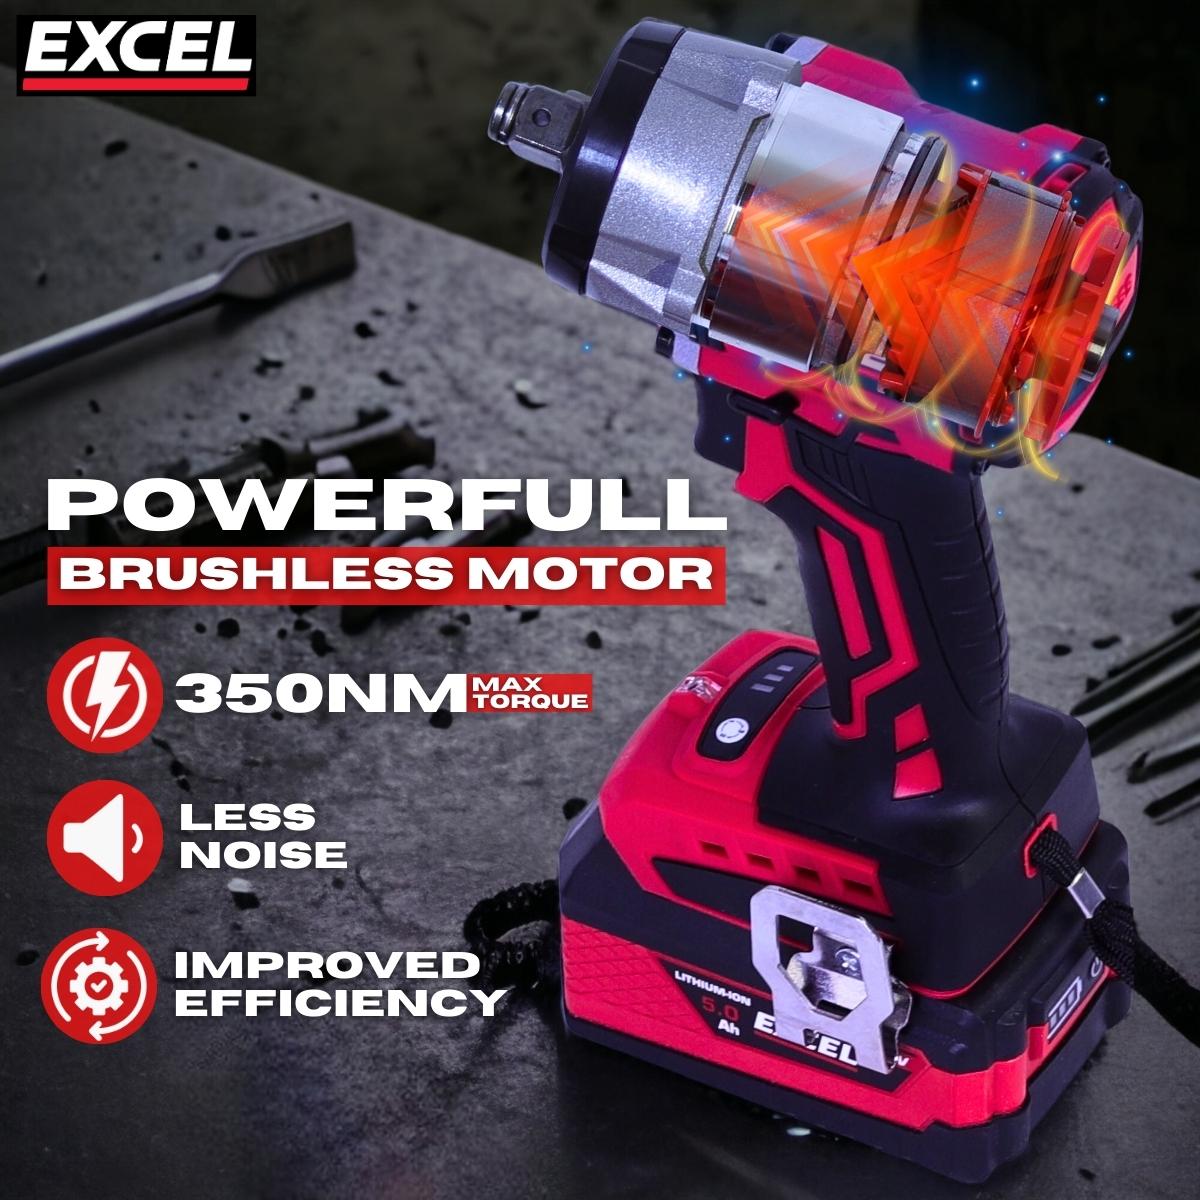 Excel 18V Cordless Brushless 1/2'' Impact Wrench with 1 x 5.0Ah Battery & Charger